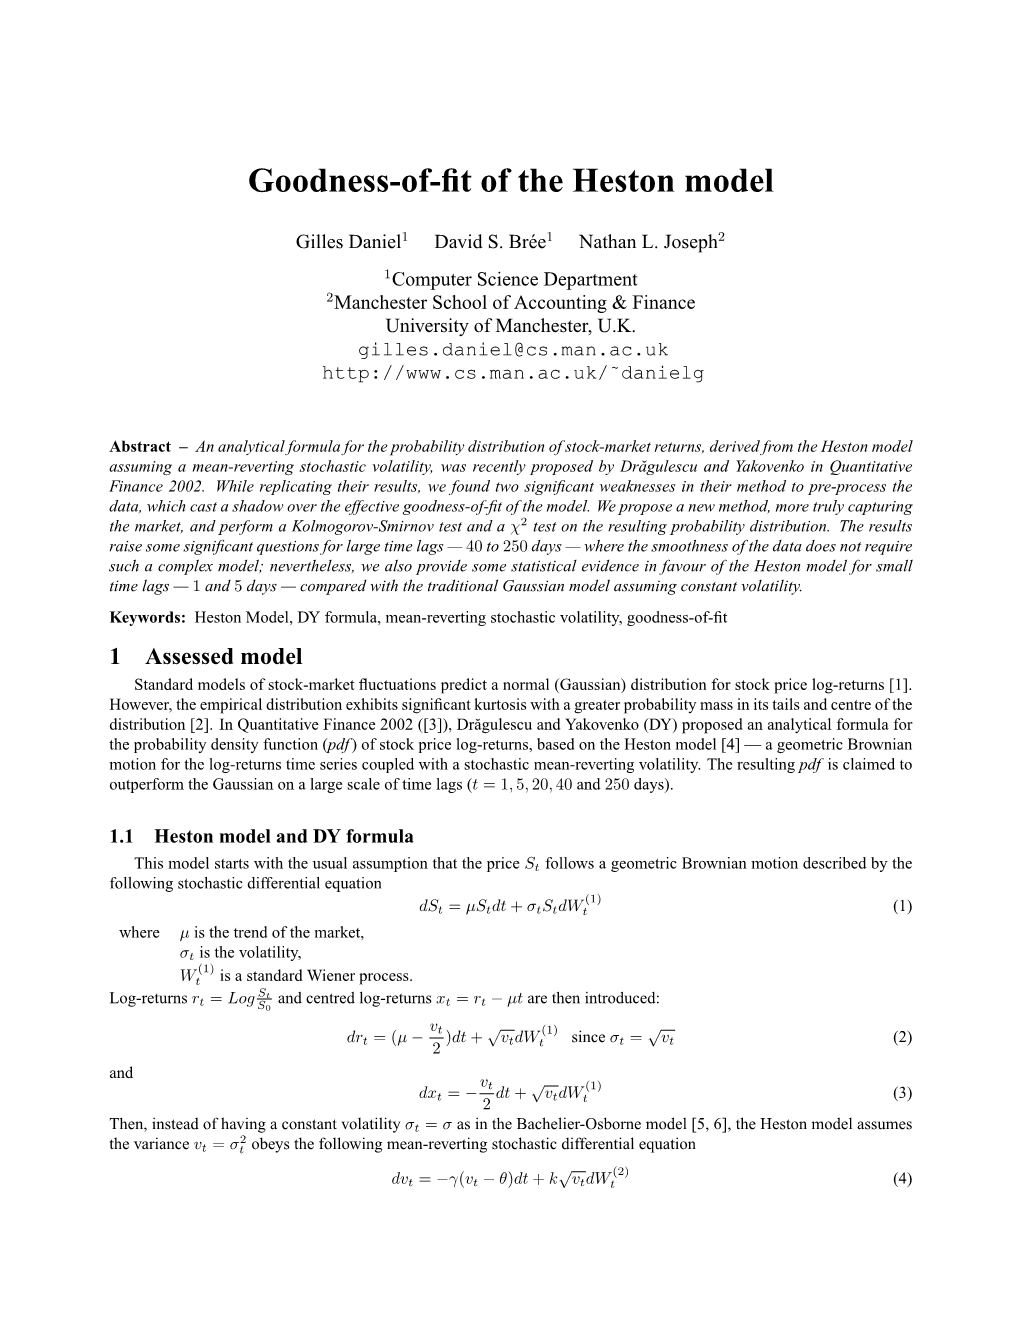 Goodness-Of-Fit of the Heston Model